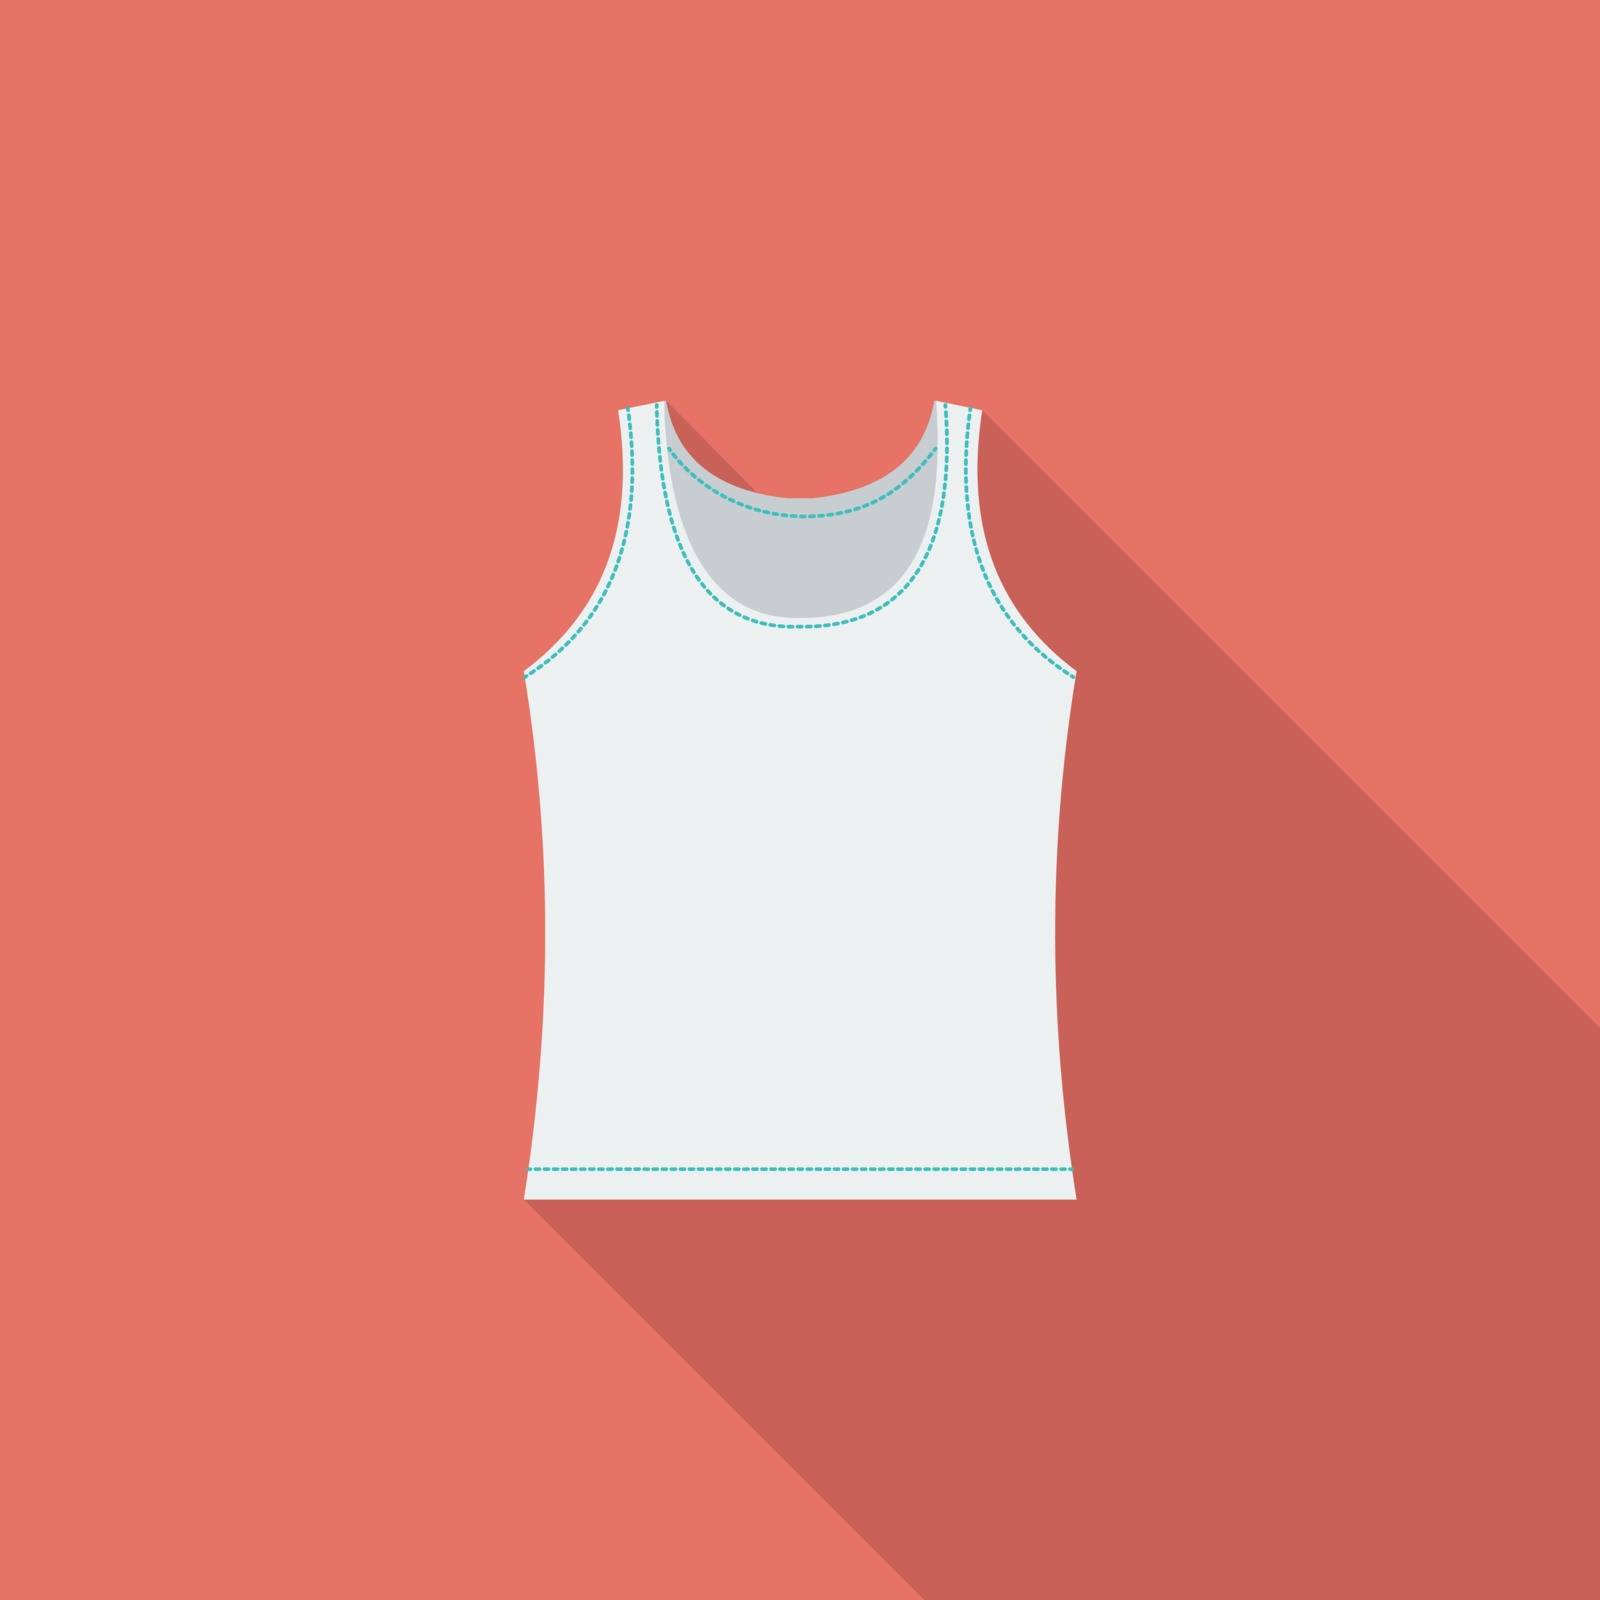 Singlet icon. Flat vector related icon with long shadow for web and mobile applications. It can be used as - logo, pictogram, icon, infographic element. Vector Illustration.